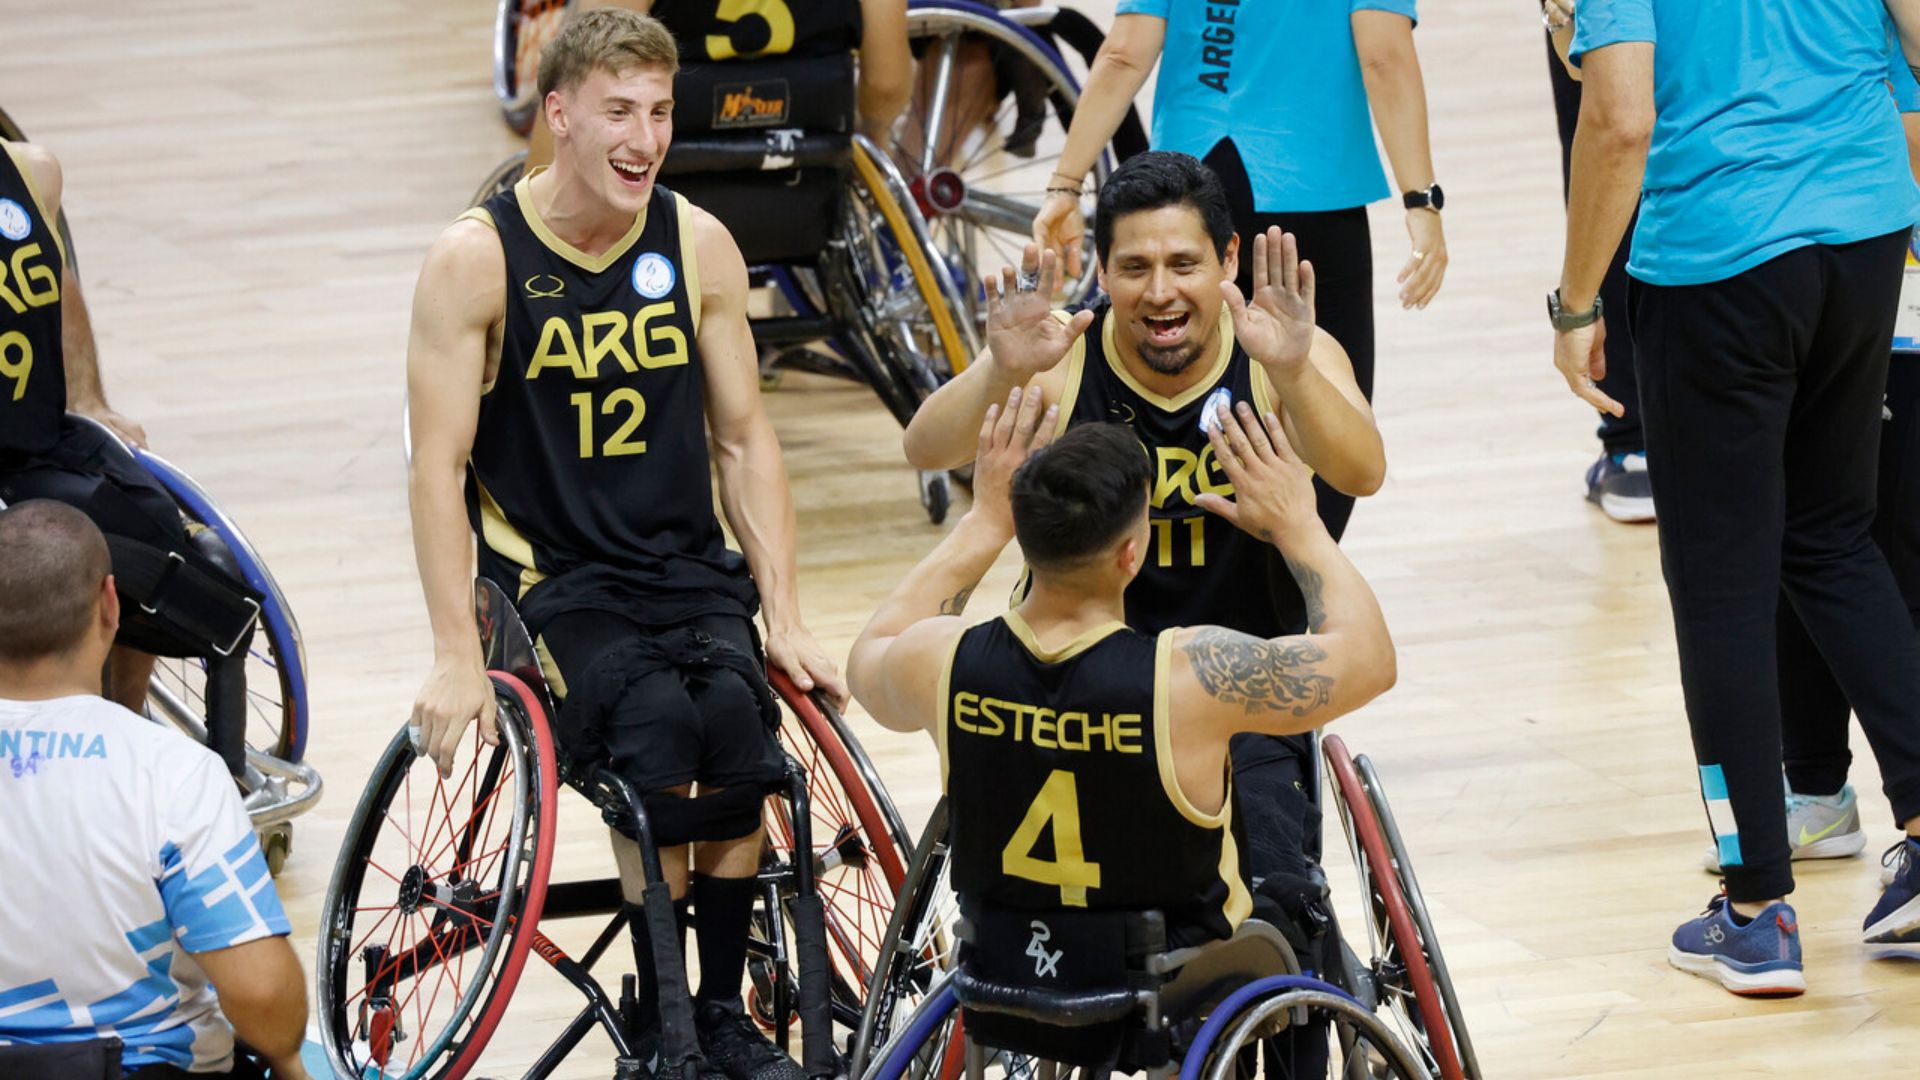 Basketball in Wheelchairs: Argentina Defeats Brazil, Advances to Semifinal